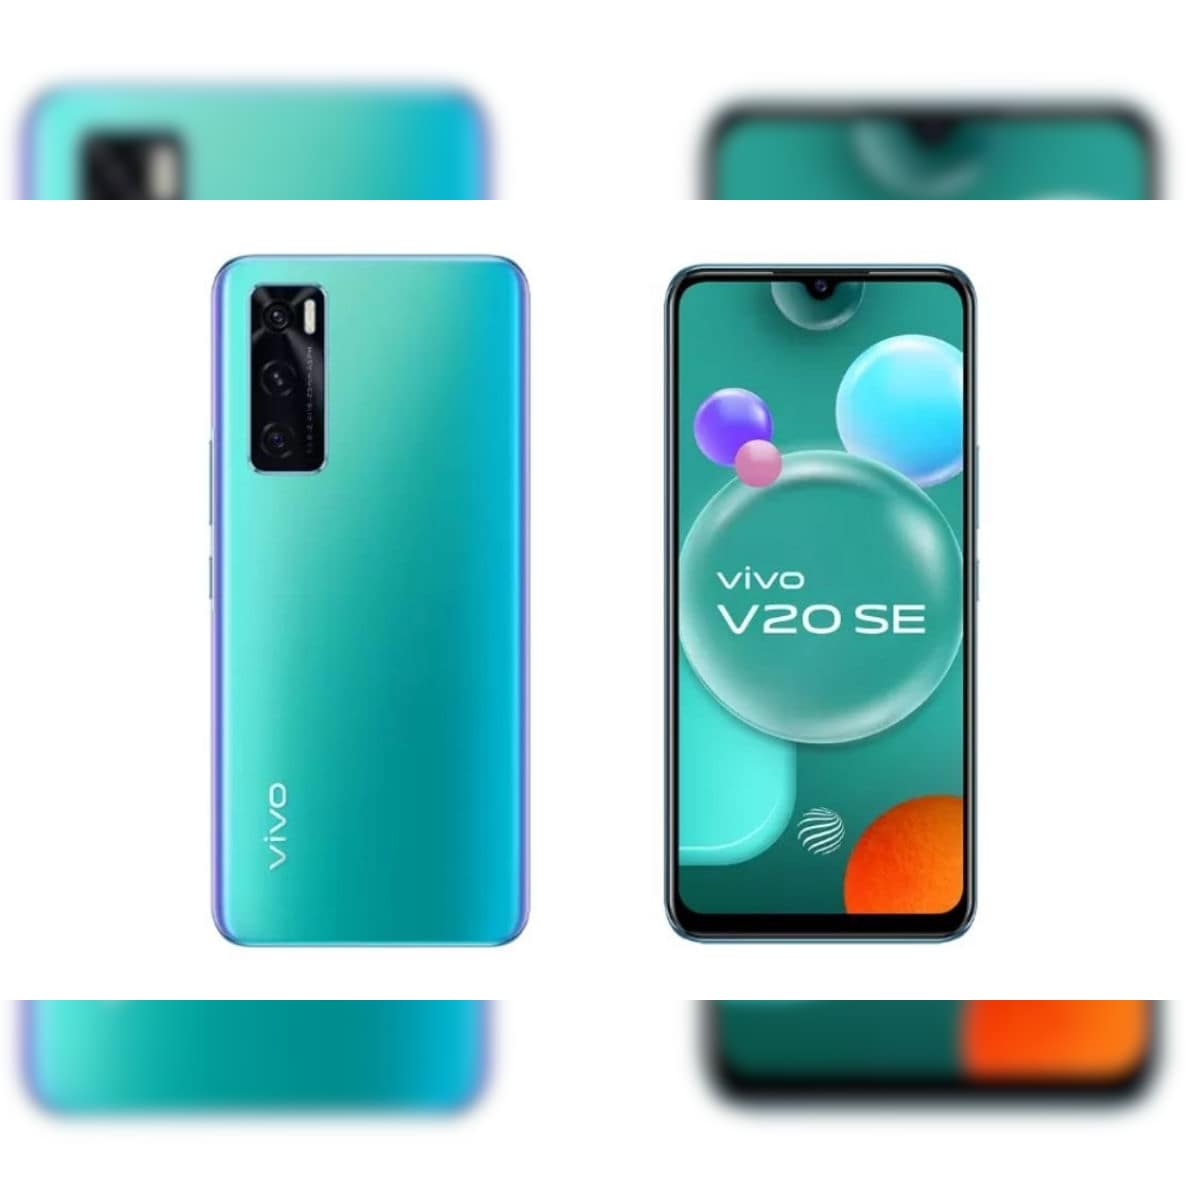 Vivo V20 Se With Triple Rear Cameras Snapdragon 665 Soc Launched In India Price Availability And More